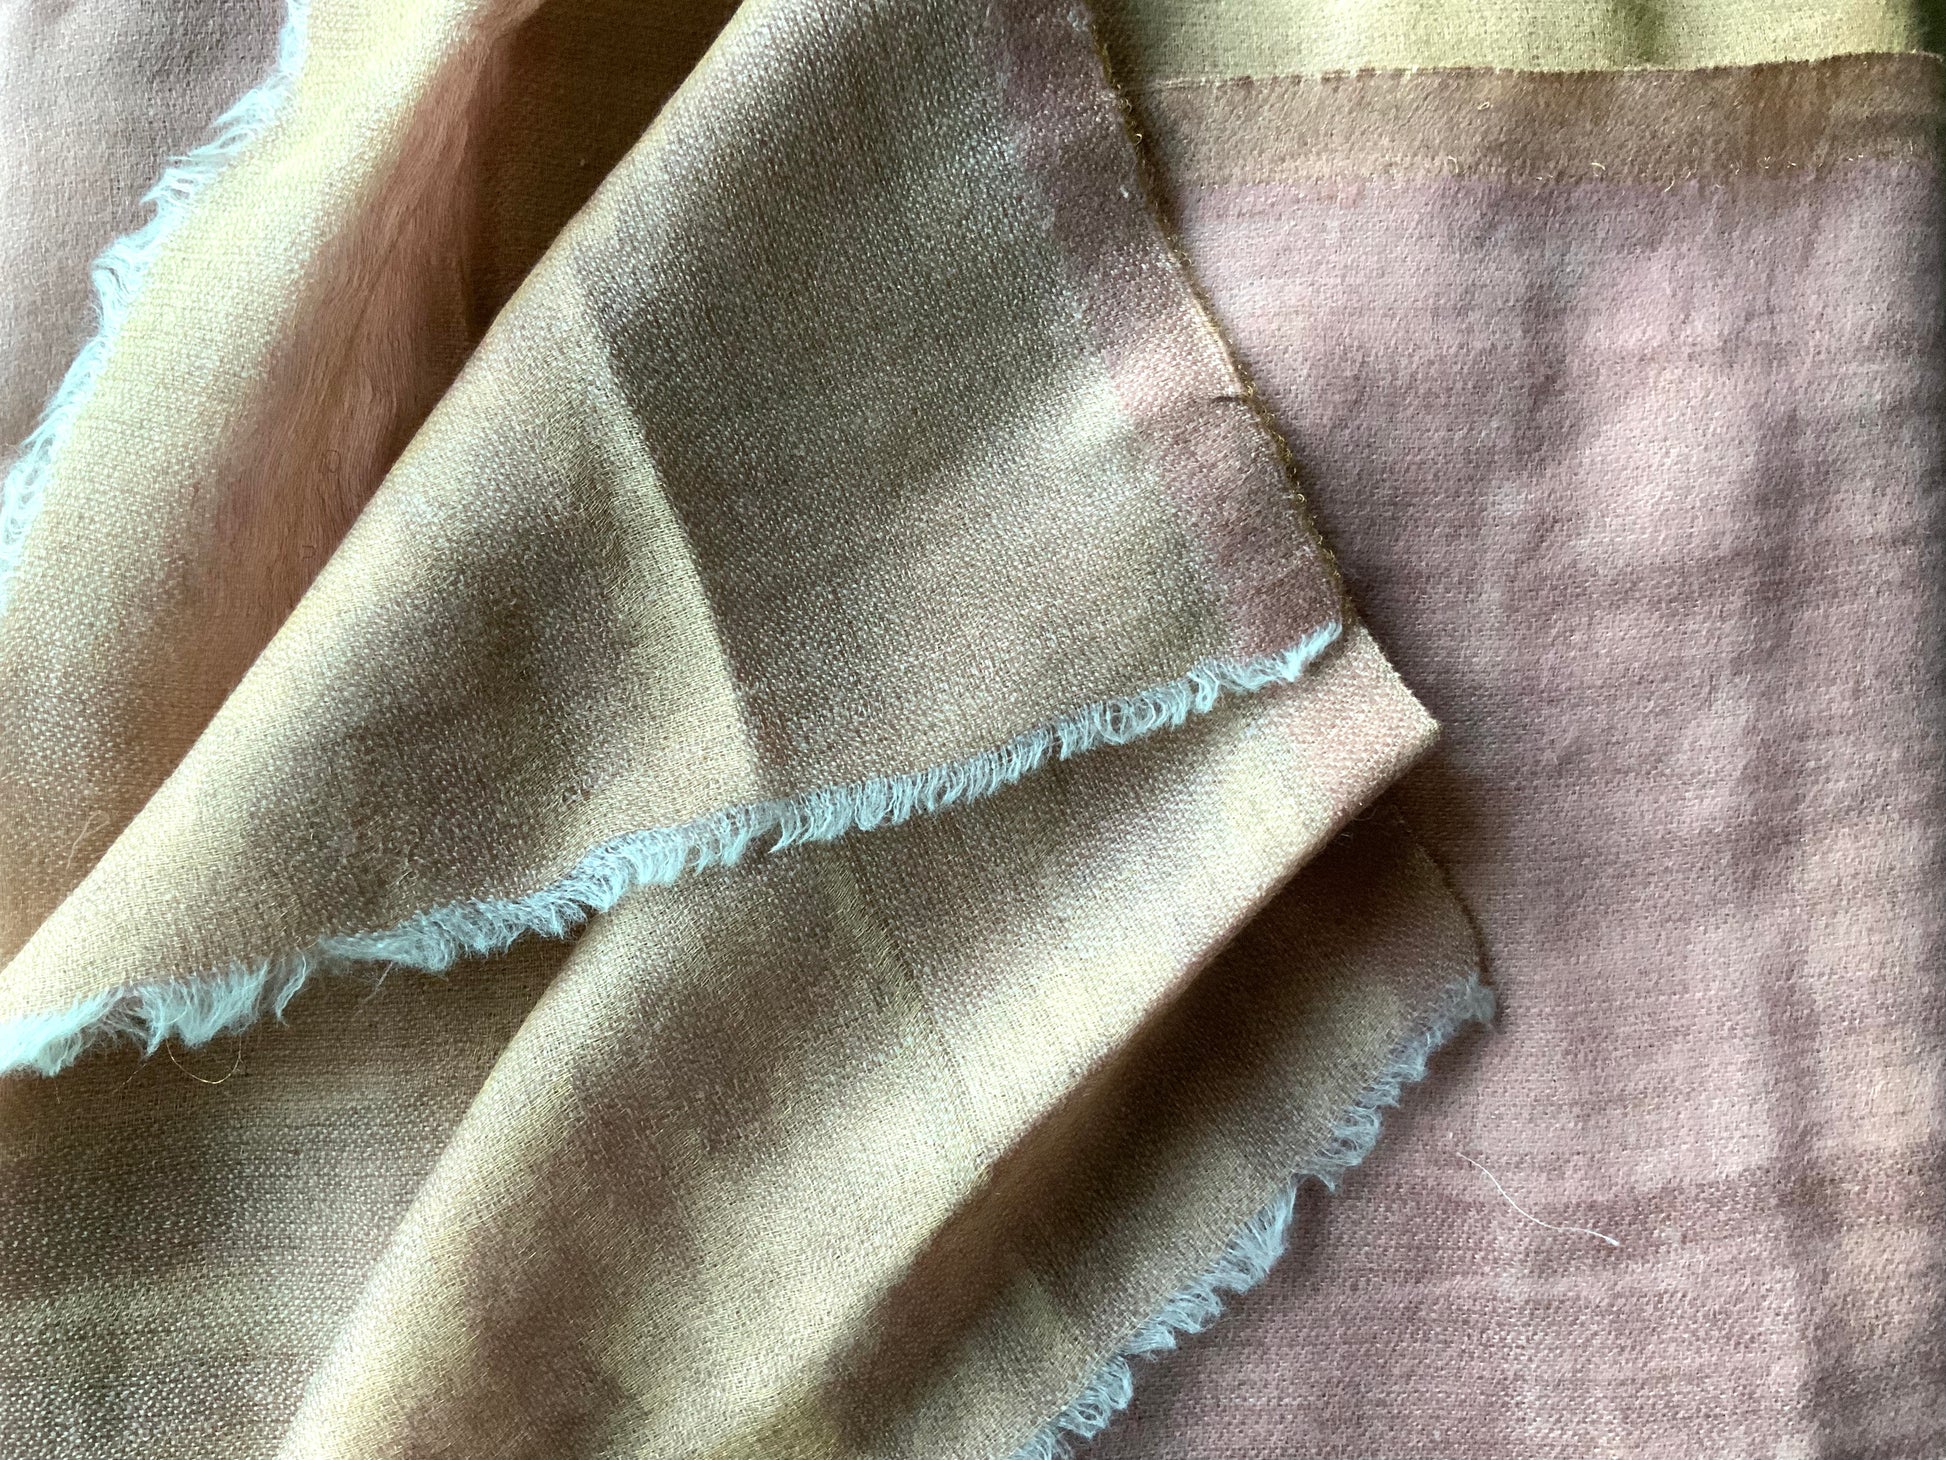 Two tone Kashmir shawl in Pink and Gold #ModernKashmirShawl #TrendingShawl #KashmirShawl - DharBazaar